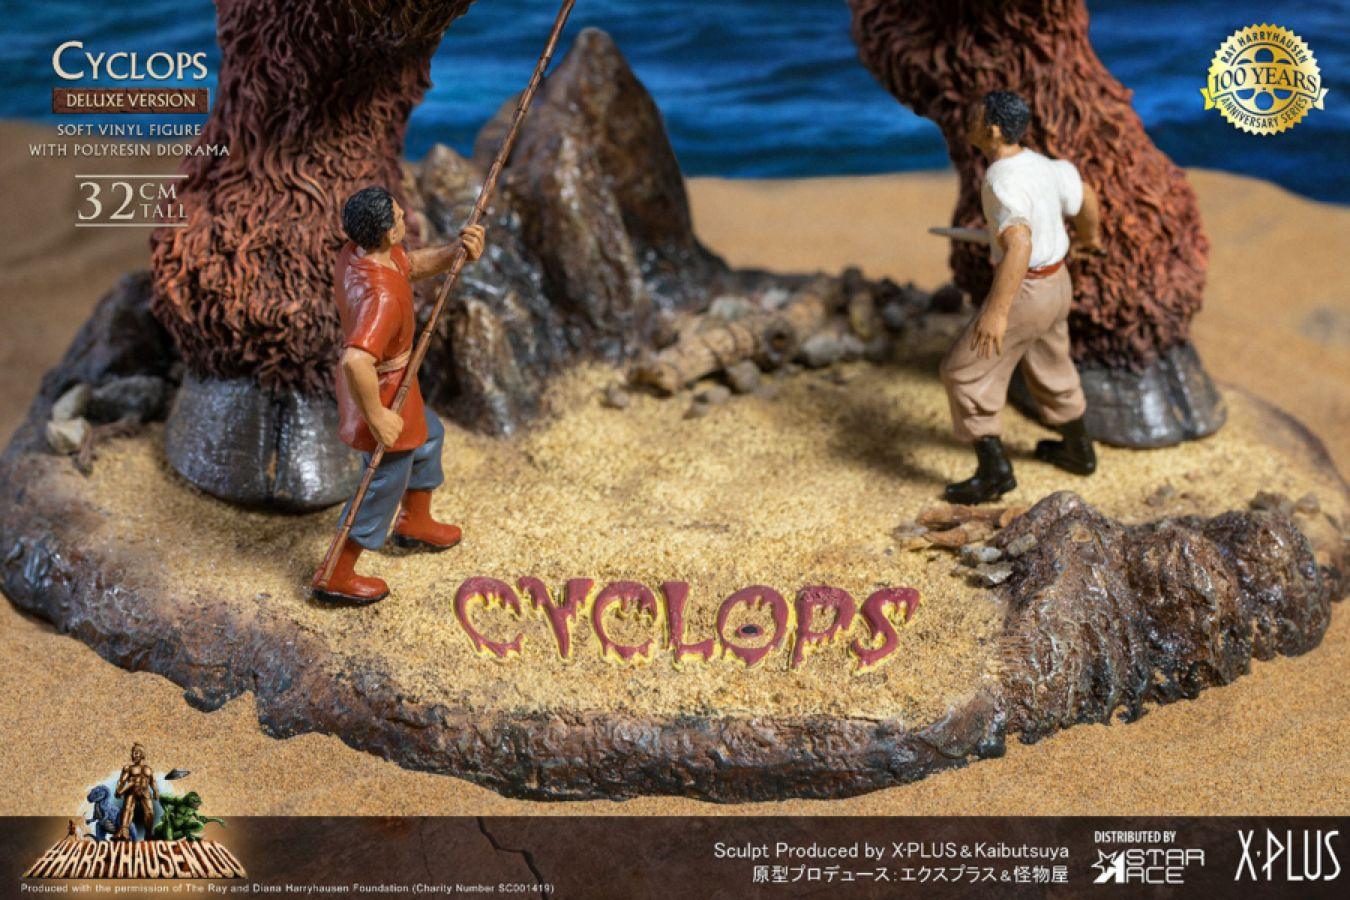 SAT9020 The 7th Voyage of Sinbad - Cyclops Deluxe Statue - Star Ace Toys - Titan Pop Culture